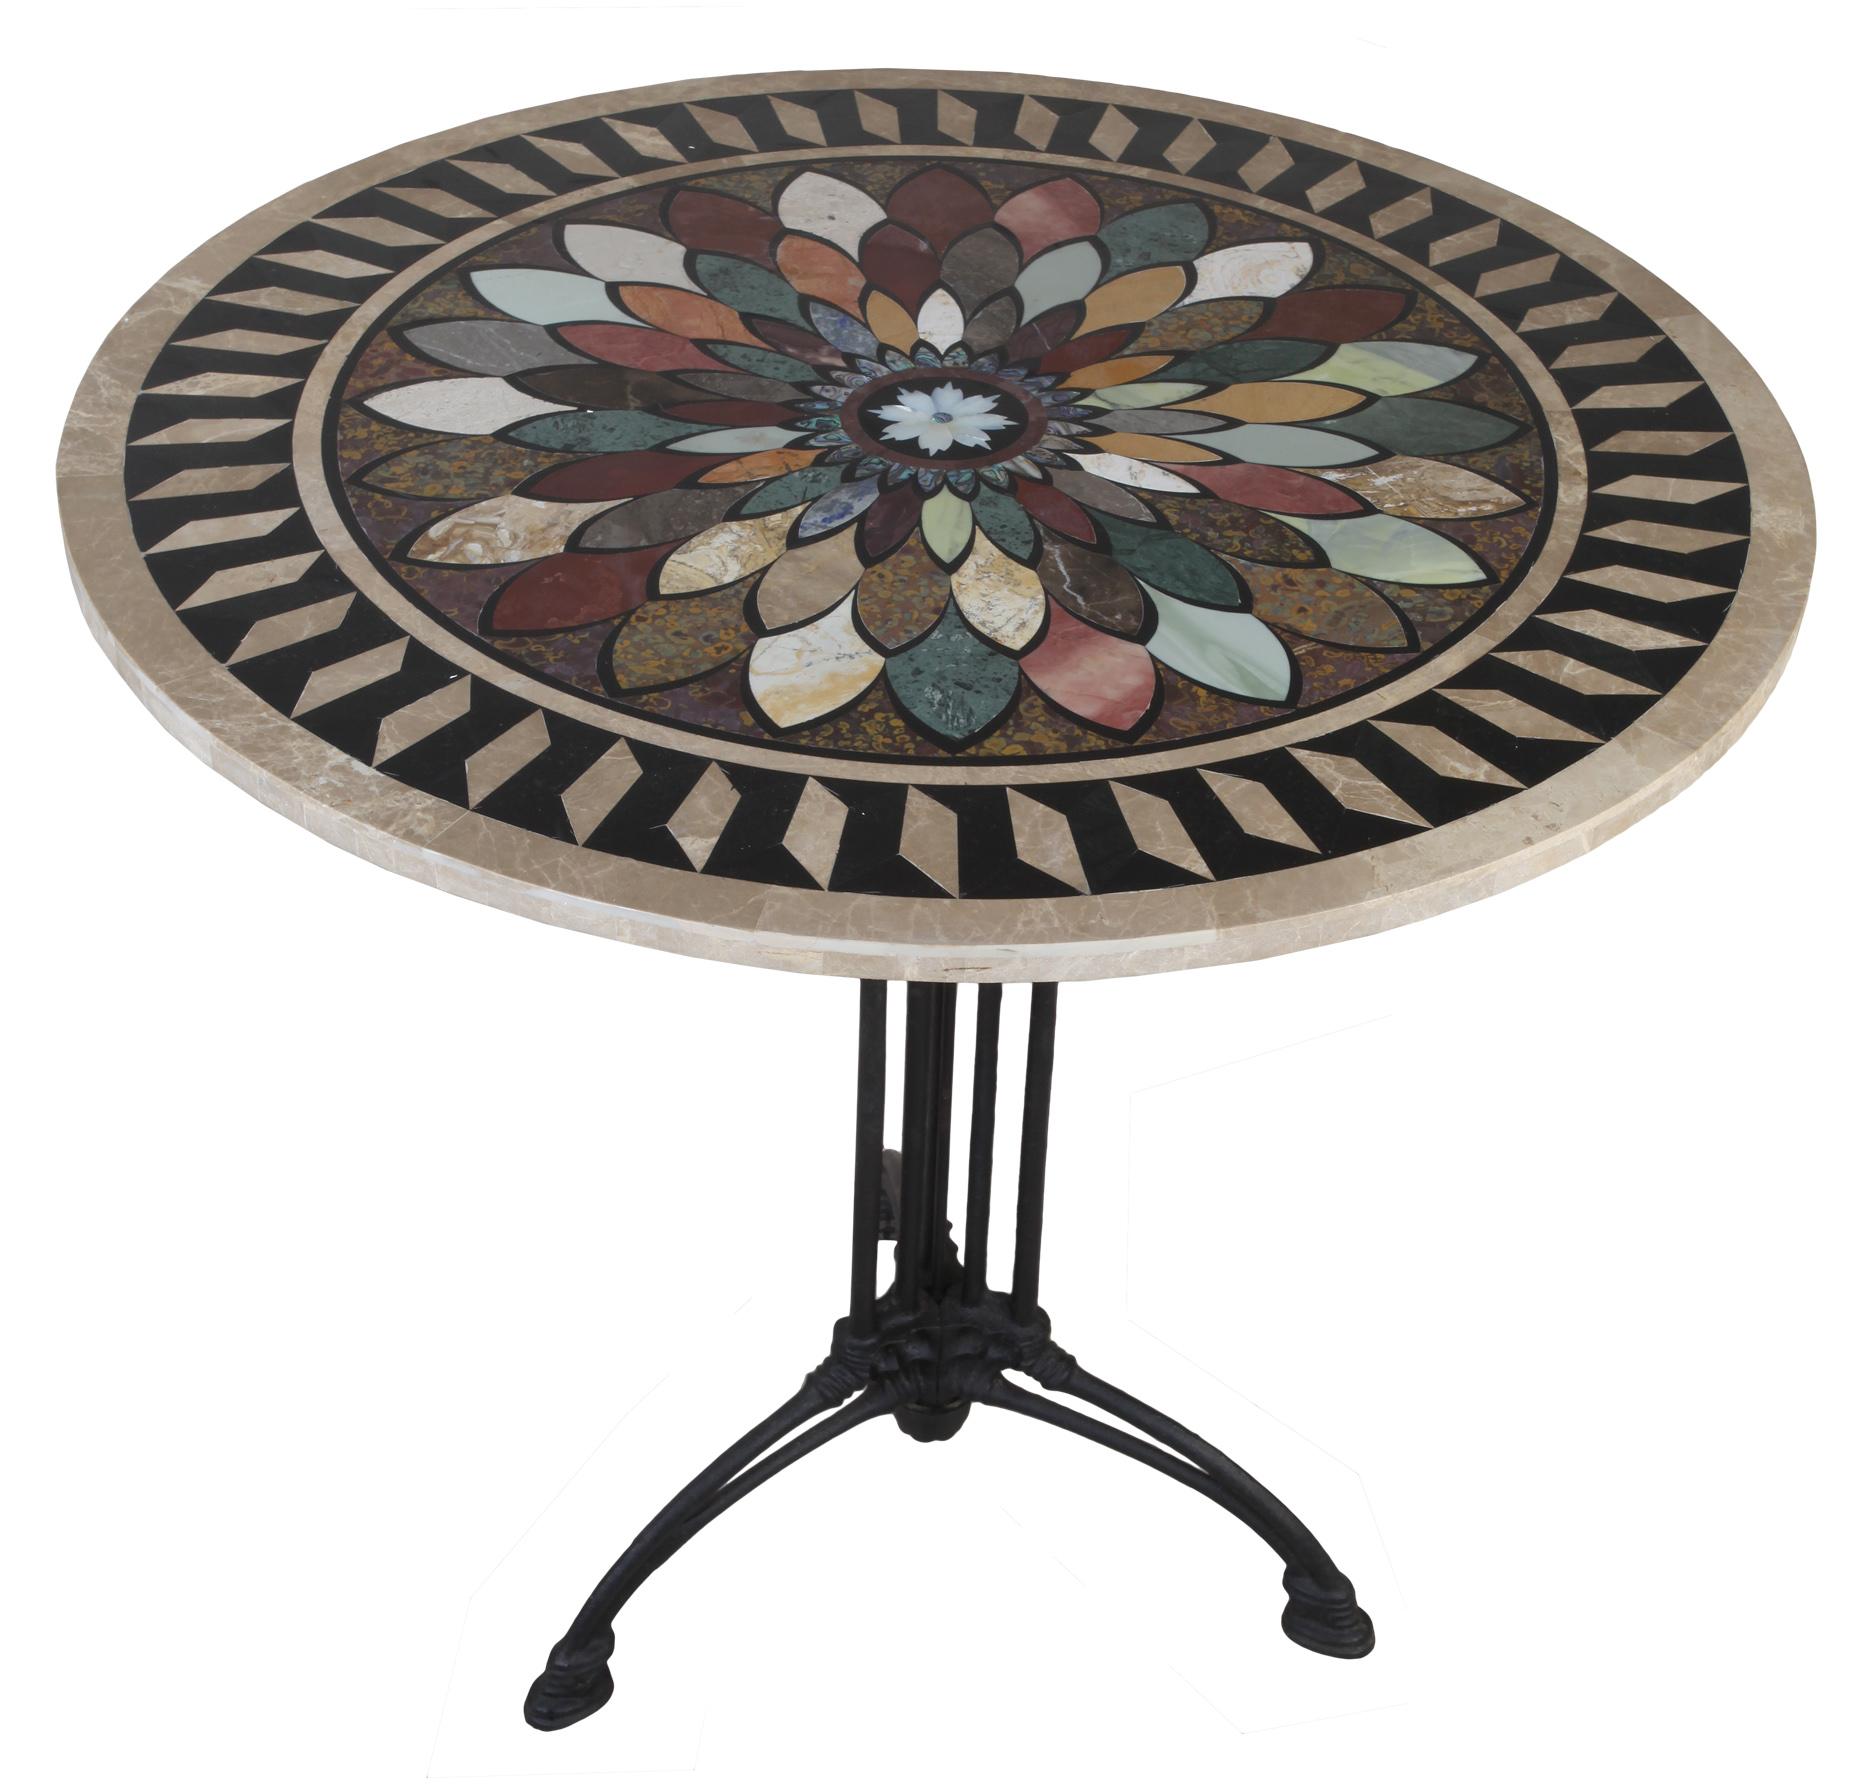 A black cast iron, Art Deco table (dining, breakfast, cafe, side table) base with a newer pietra dura specimen tabletop. Stones include varieties of marble, jasper, mother-of-pearl, abalone, among others. Intricate pattern and design. 1930s and